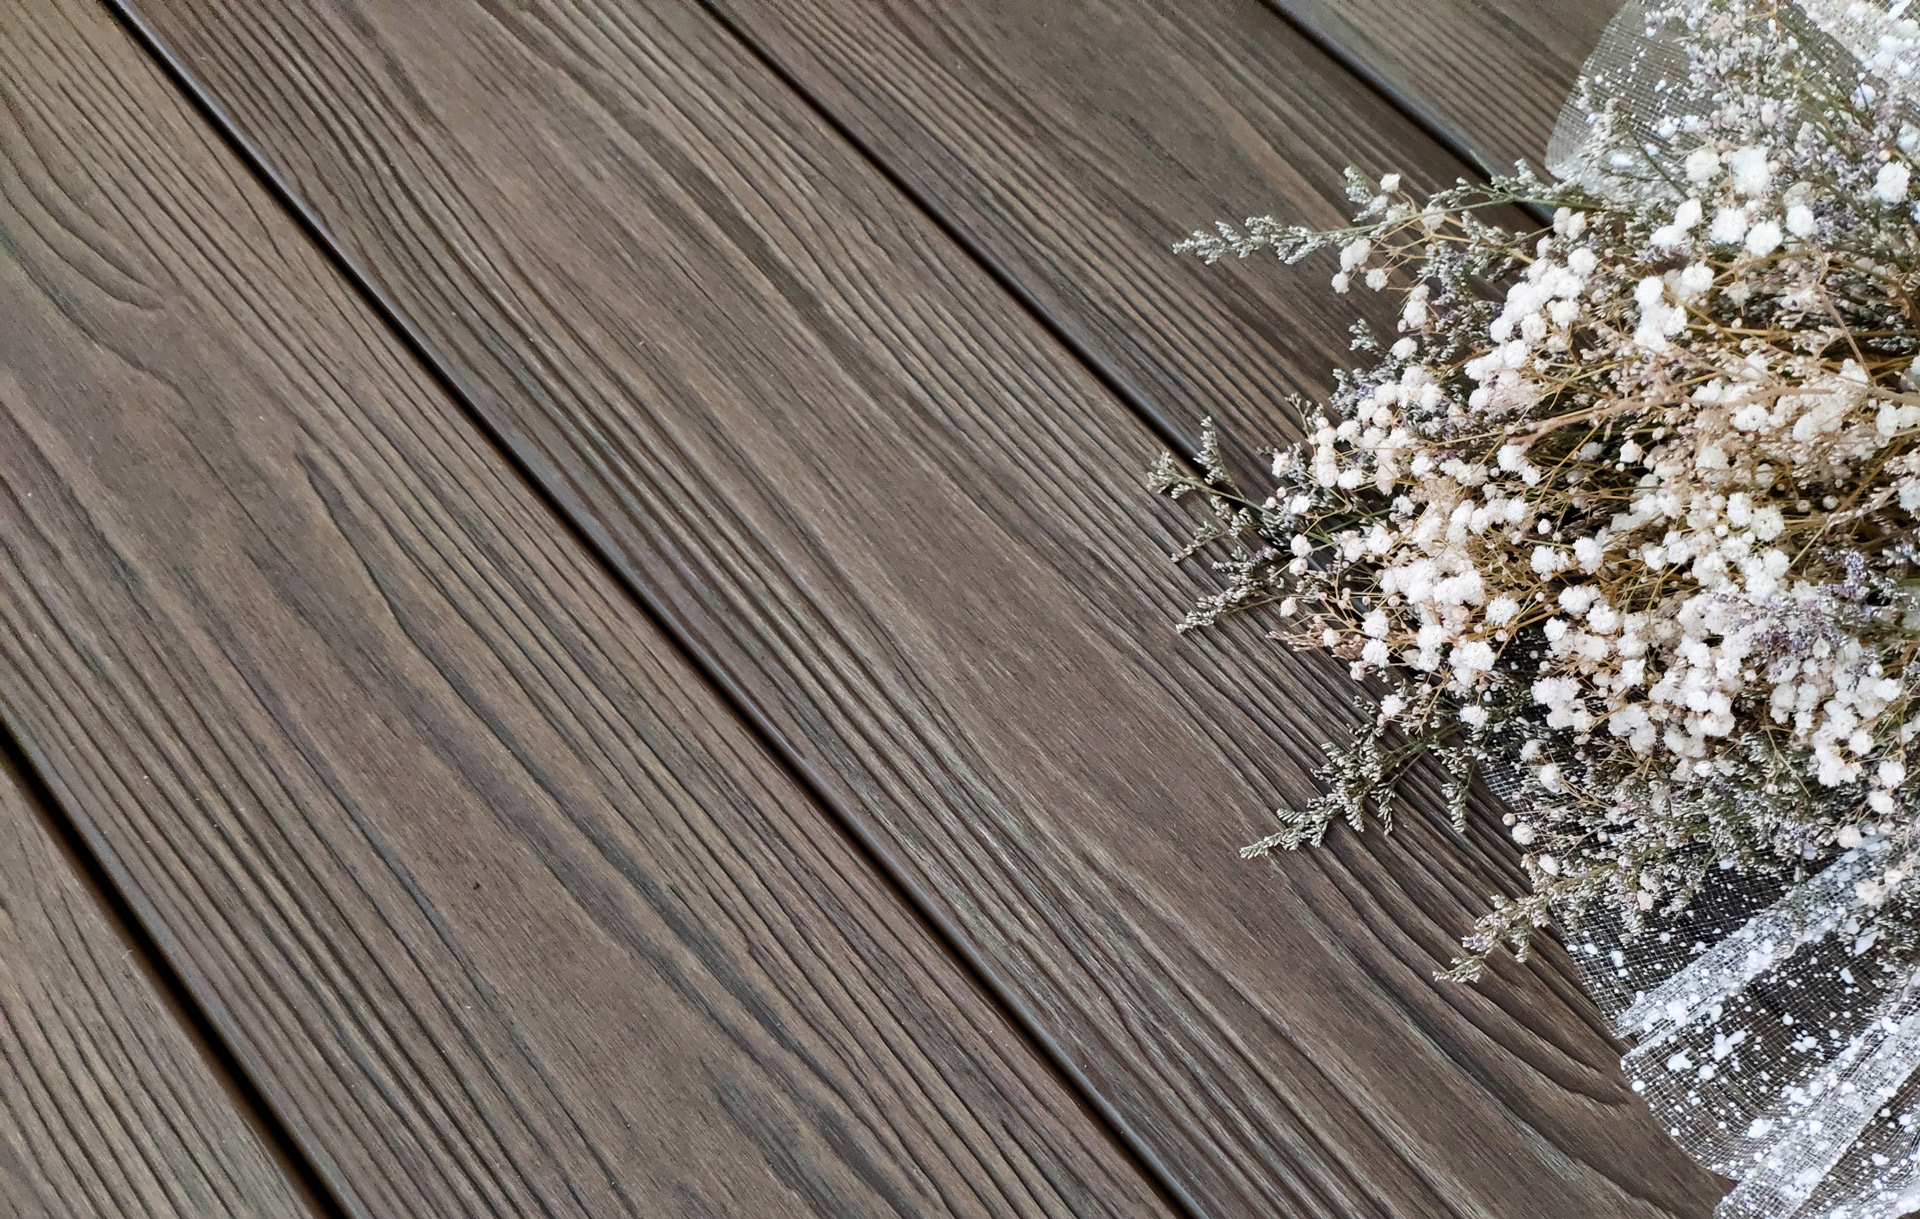 Close up of dark bamboo composite decking with white flower bouquet off to the side.